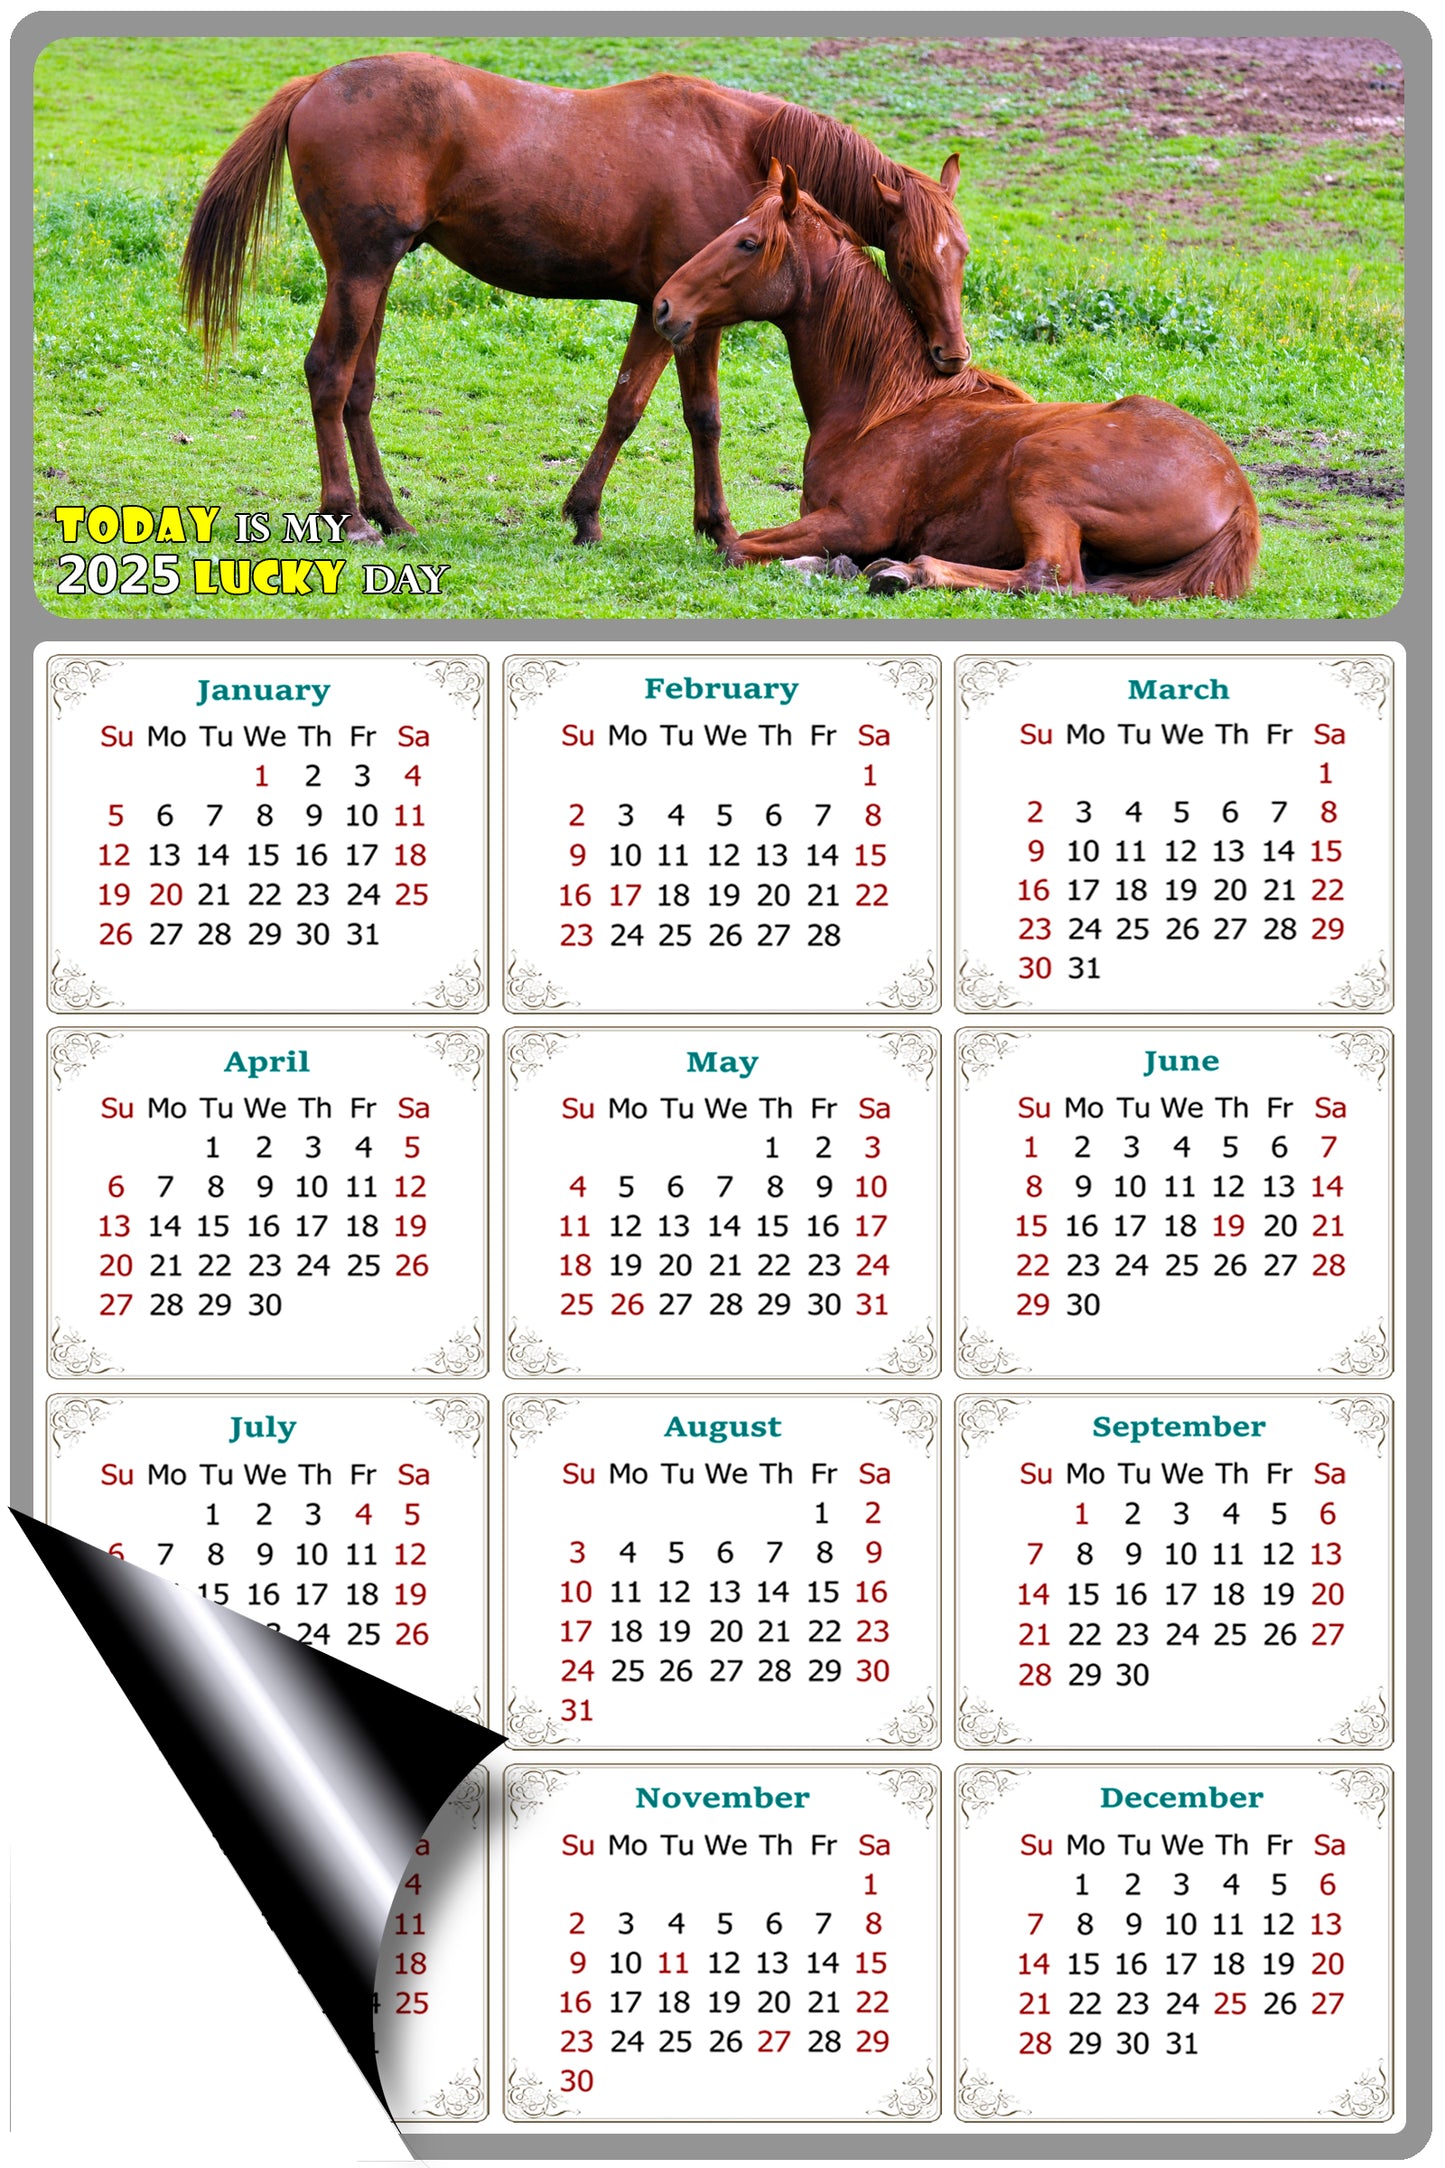 2025 Magnetic Calendar - Calendar Magnets - Today is my Lucky Day - (Fade, Tear, and Water Resistant) - Horses Themed 019